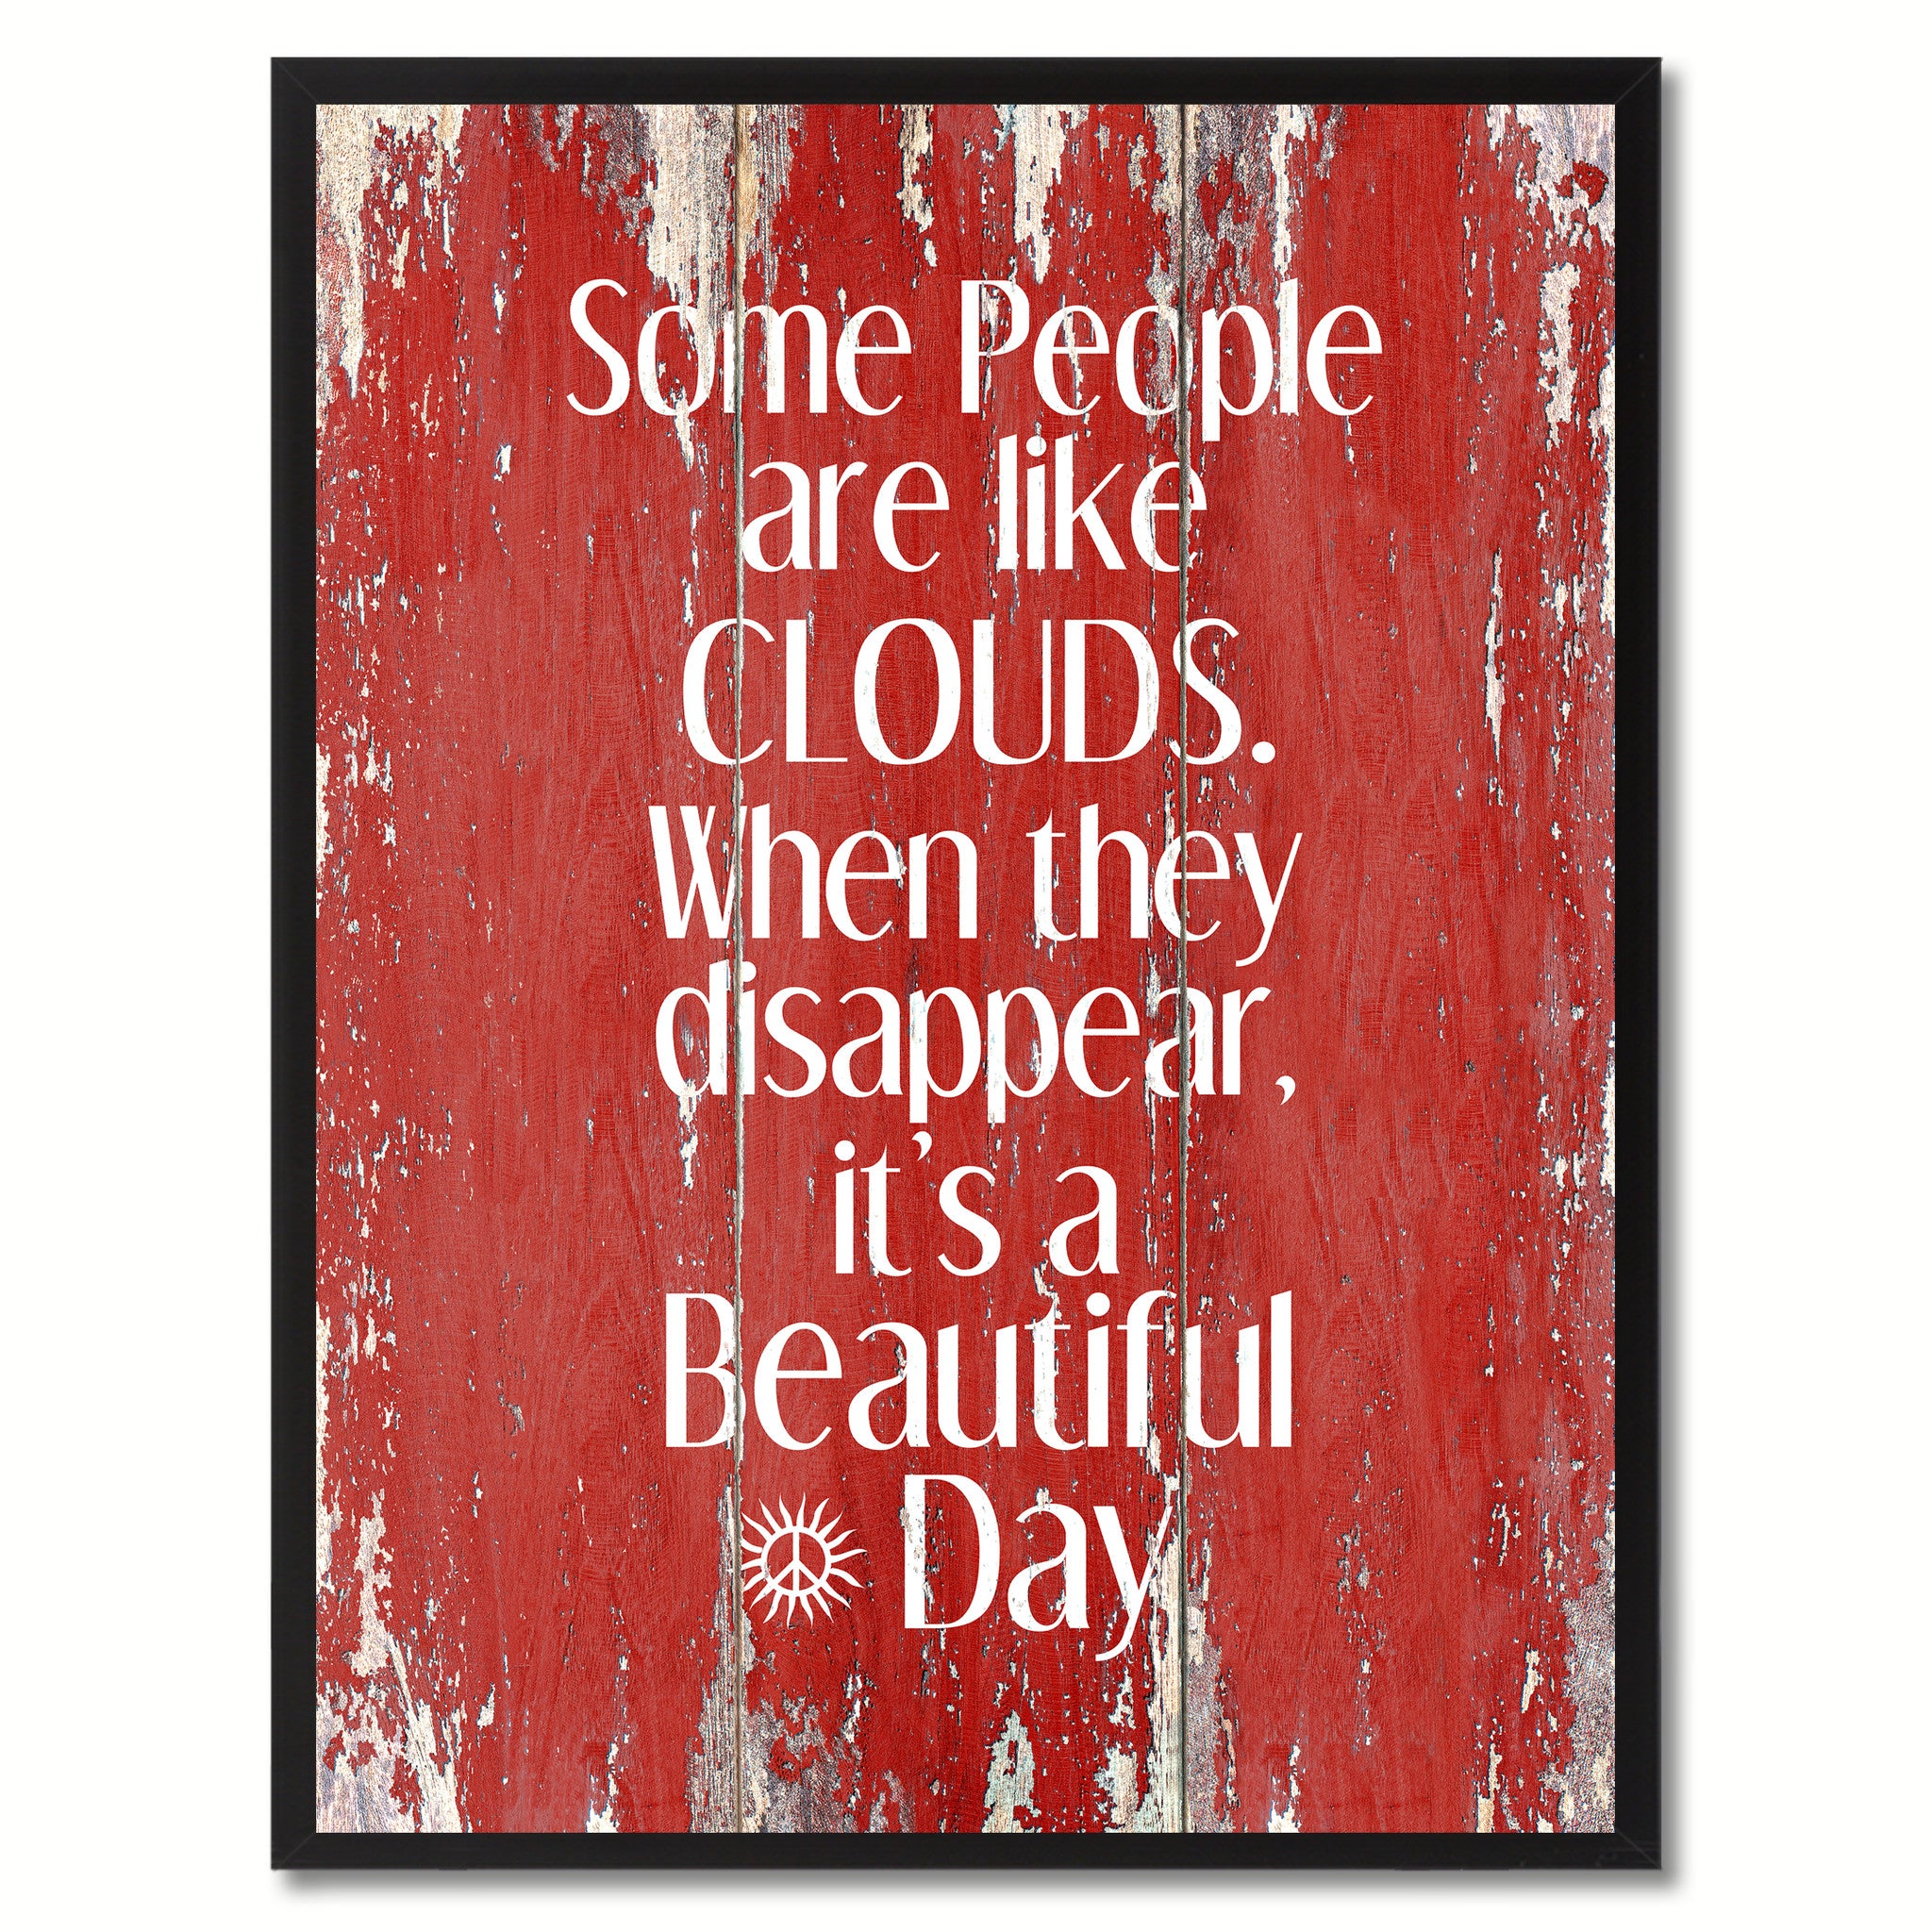 Some People Like Clouds When They Disappear Saying Canvas Print, Black Picture Frame Home Decor Wall Art Gifts